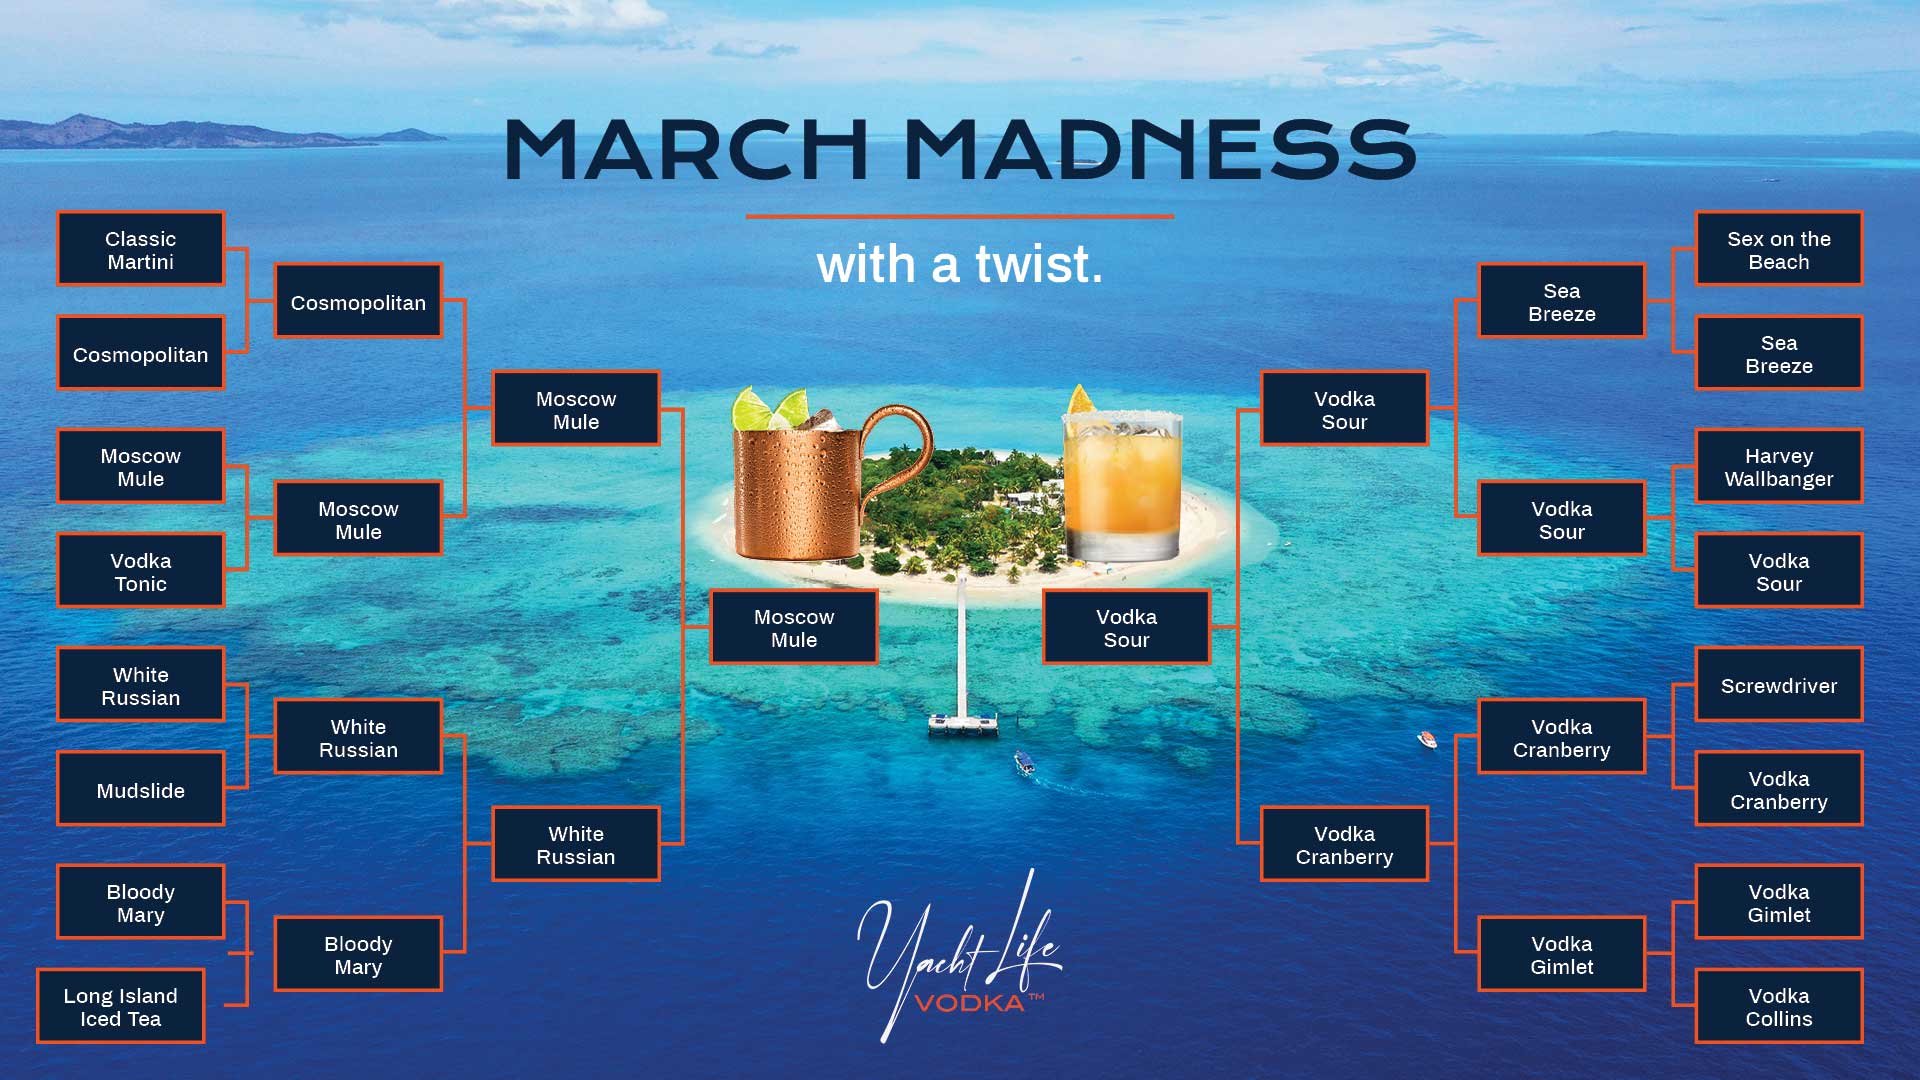 March Madness brackets used for Yacht Life Vodka-mixed drinks. Classic martini vs cosmopolitan, vodka tonic vs moscow mule, white russian vs mudslide, bloody mary vs. long island iced tea. All against sex on the beach vs sea breeze, harvey wallbanger vs vodka sour, screwdriver vs vodka cranberry, vodka gimlet vs vodka collins.

It came down to the Moscow Mule vs the Vodka Sour.